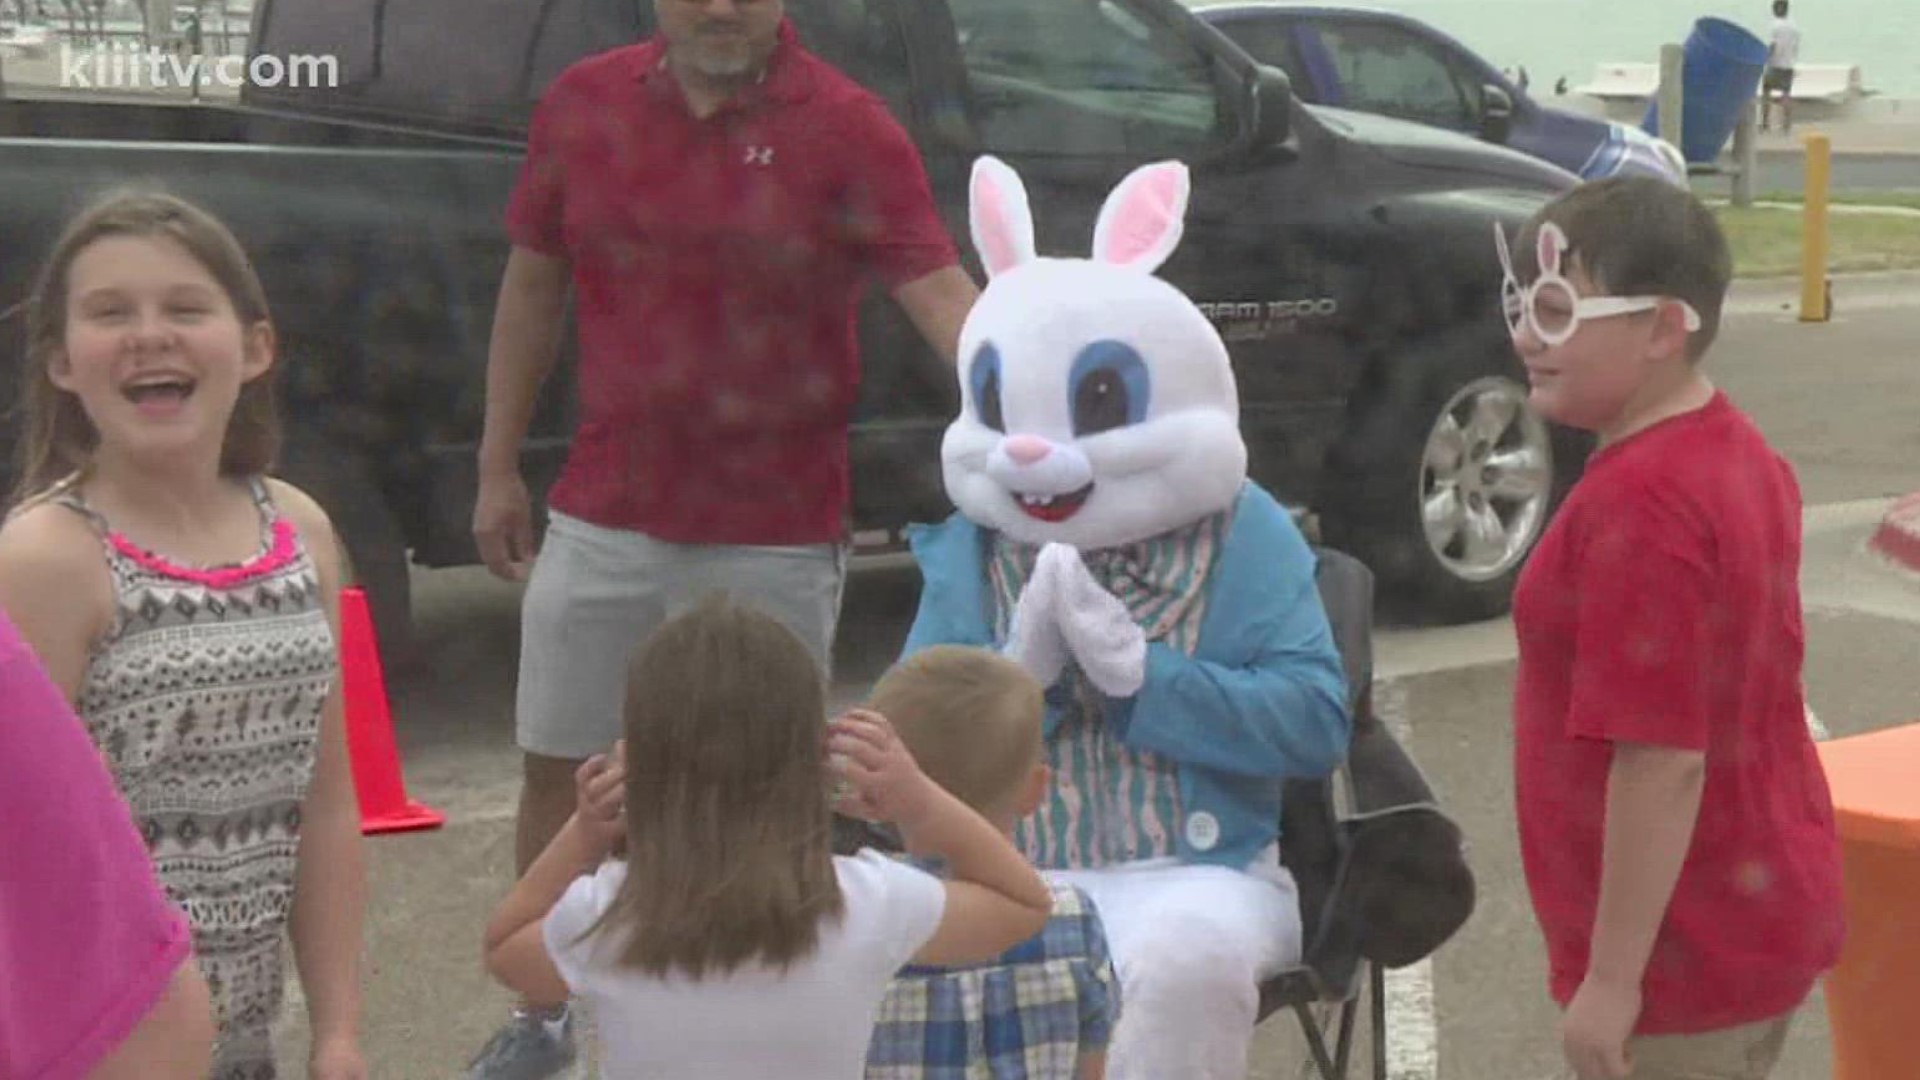 155 children who pre-registered for the event were able to load up their baskets with goodie-filled eggs and visit with the Easter Bunny.